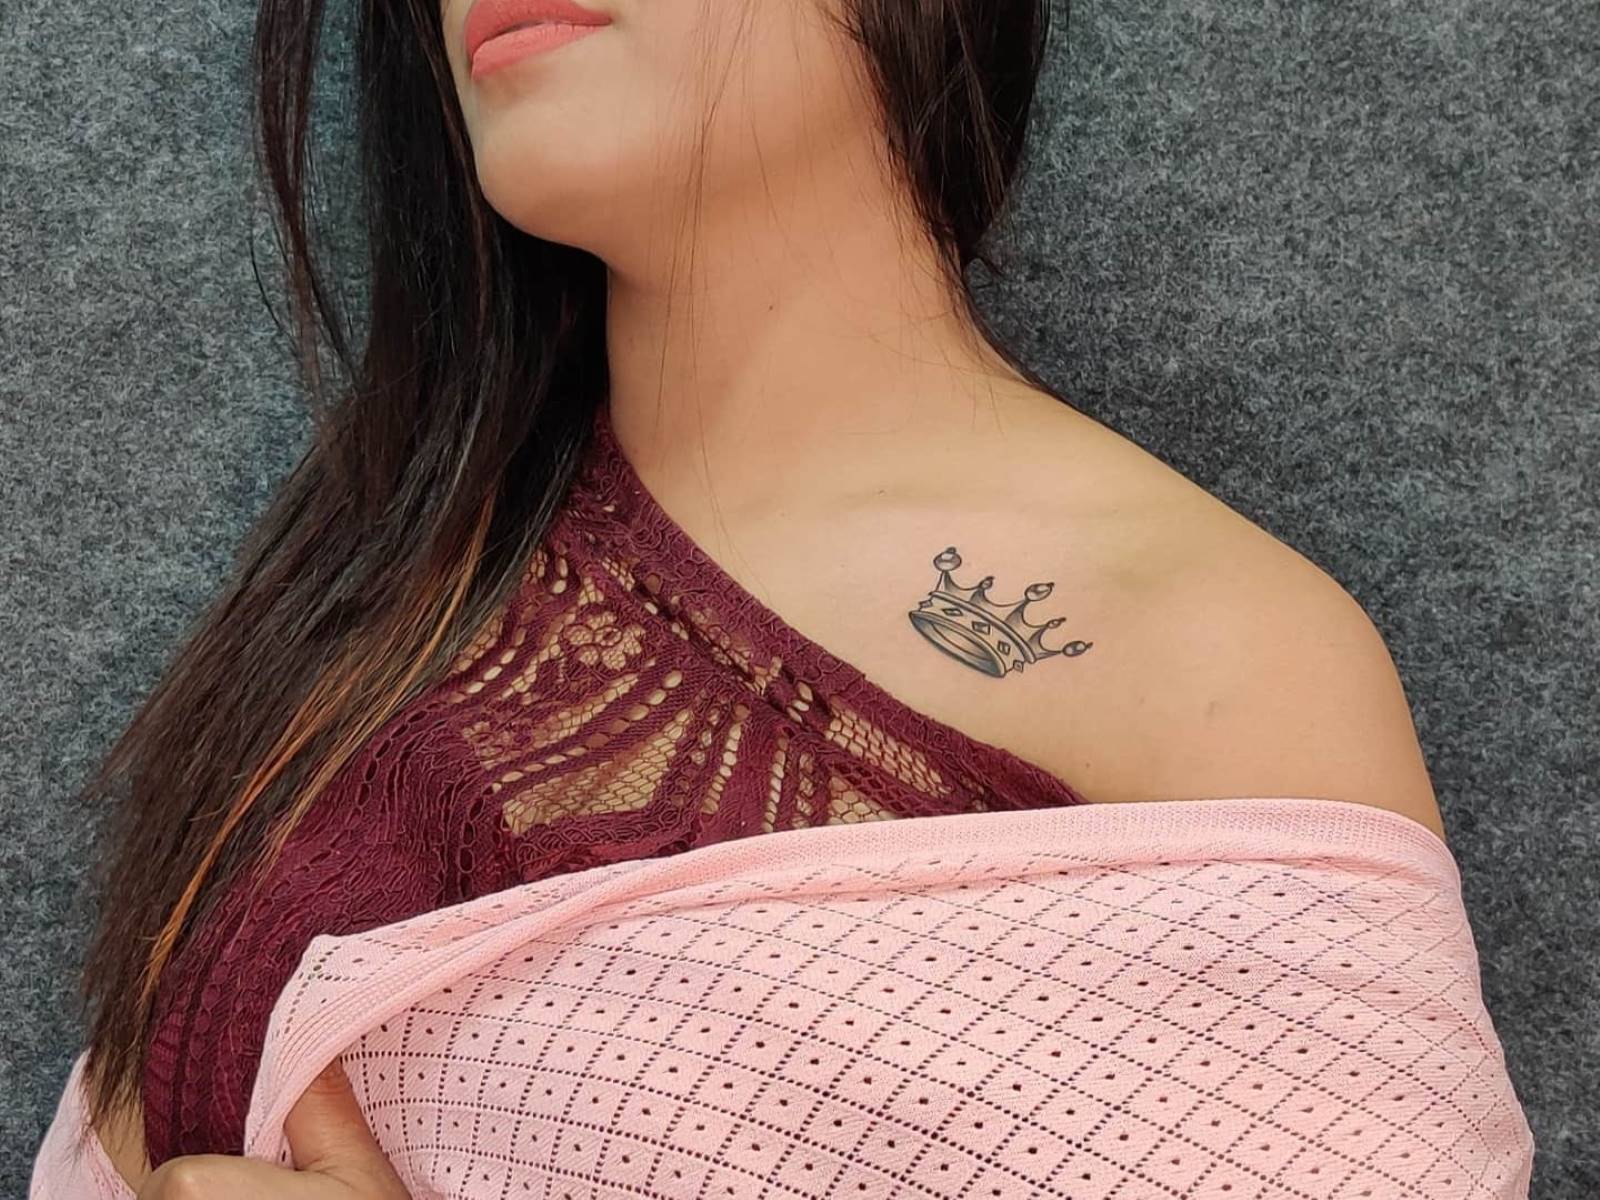 The Hidden Meaning Behind A Girl's Shoulder Crown Tattoo Revealed!